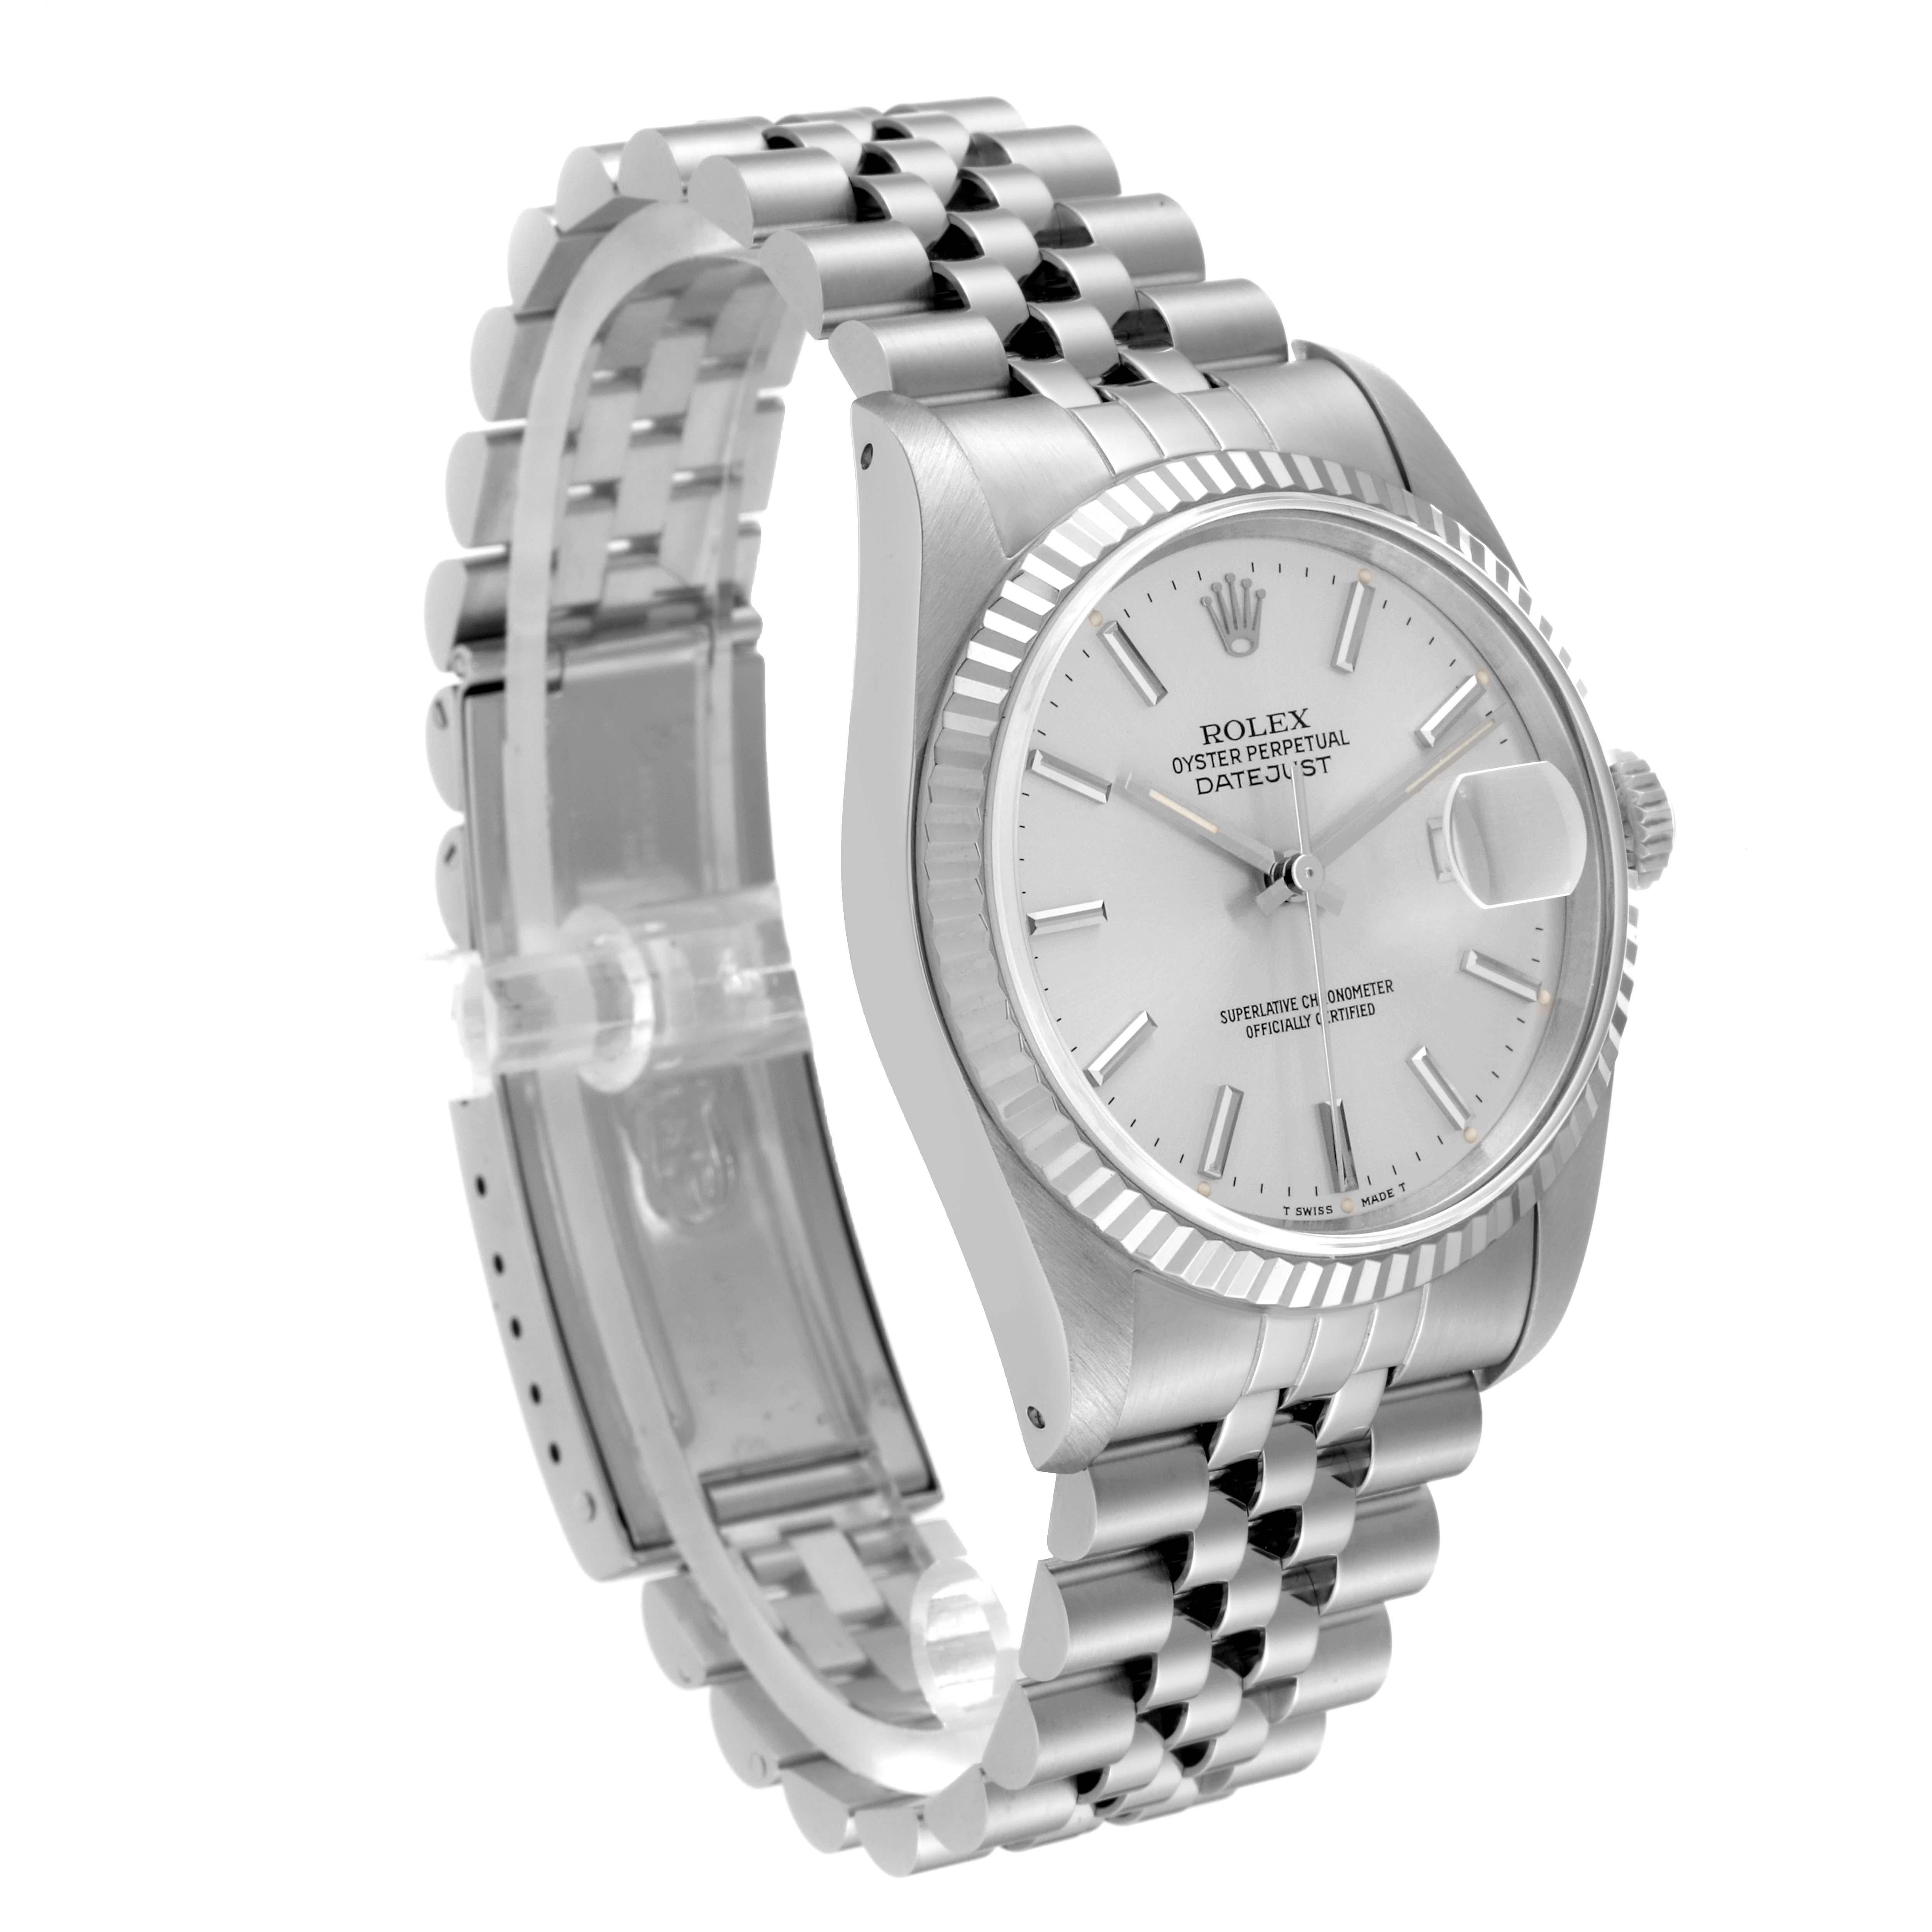 Rolex Datejust Silver Dial Steel White Gold Mens Watch 16234 For Sale 3